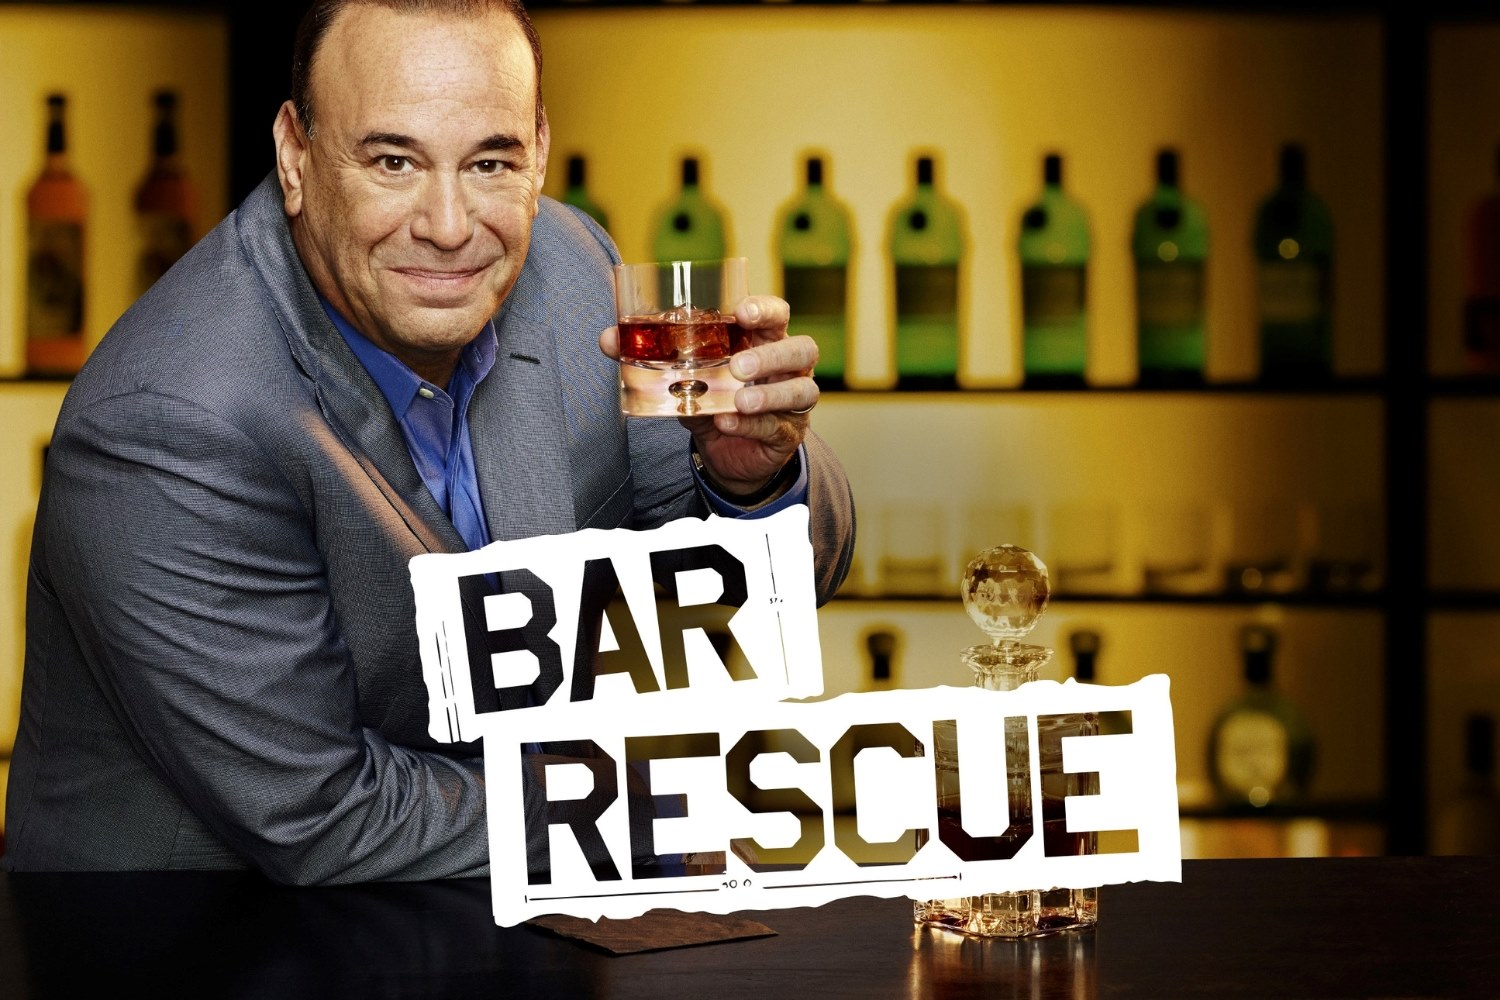 The Shocking Truth Behind Bar Rescue Revealed!